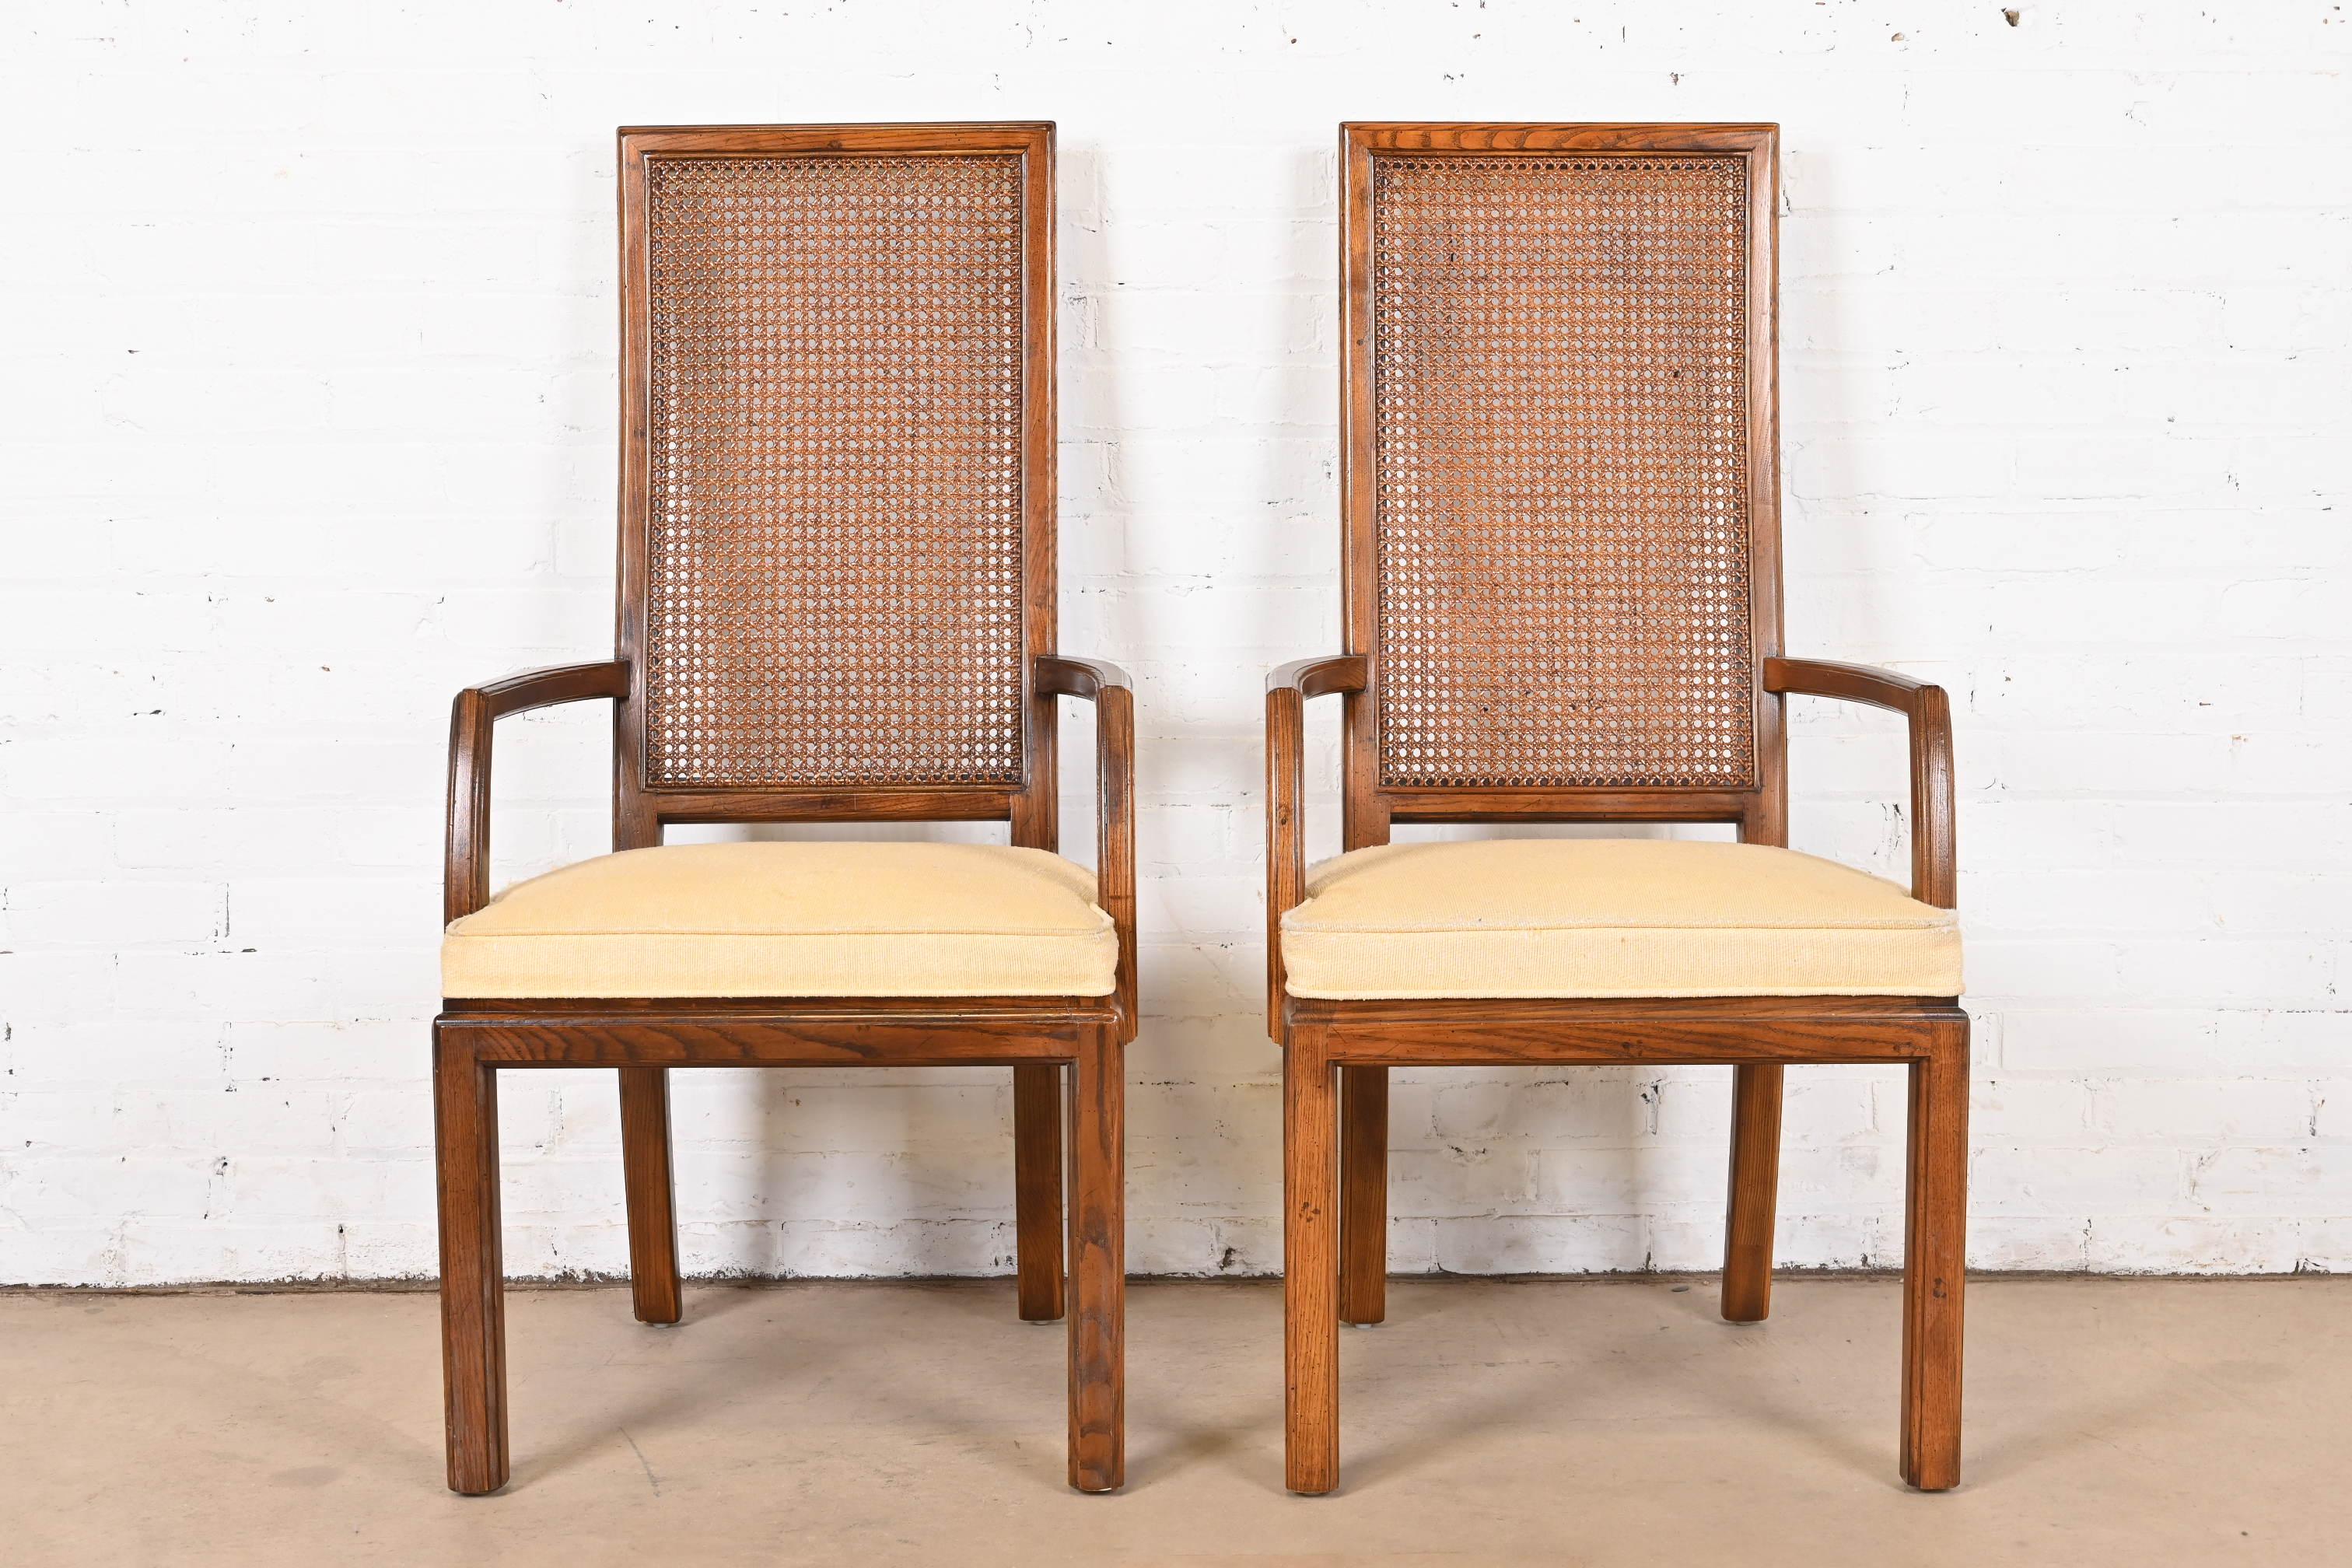 American Henredon Mid-Century Modern Oak and Cane High Back Dining Arm Chairs, Pair For Sale